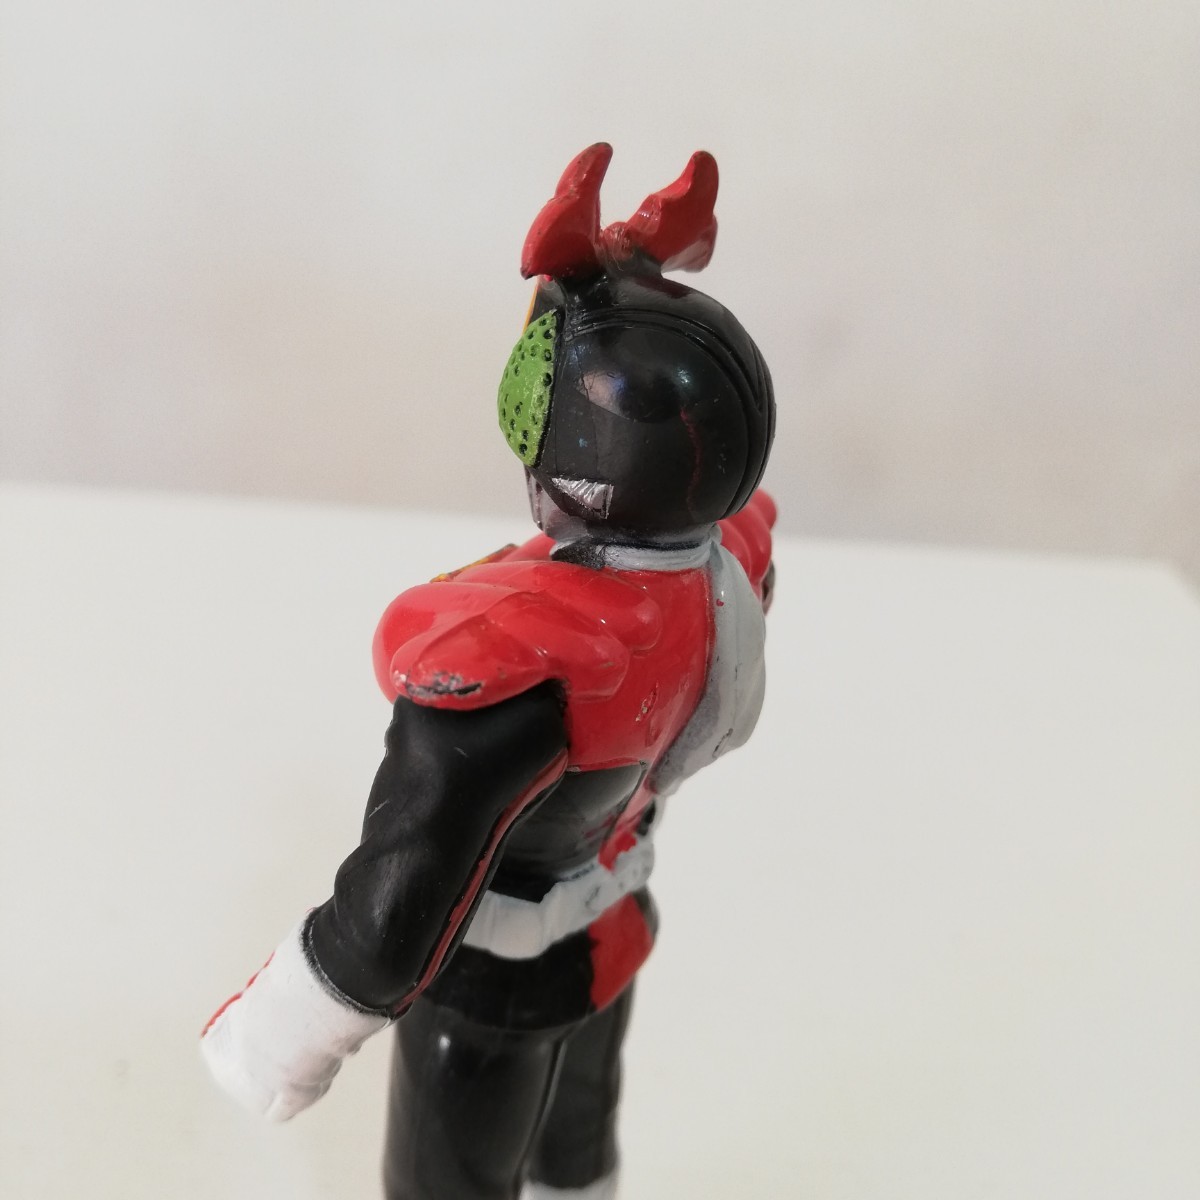 1993 year Vintage Kamen Rider Stronger that time thing figure height 10.3cm [ sofvi doll character ]